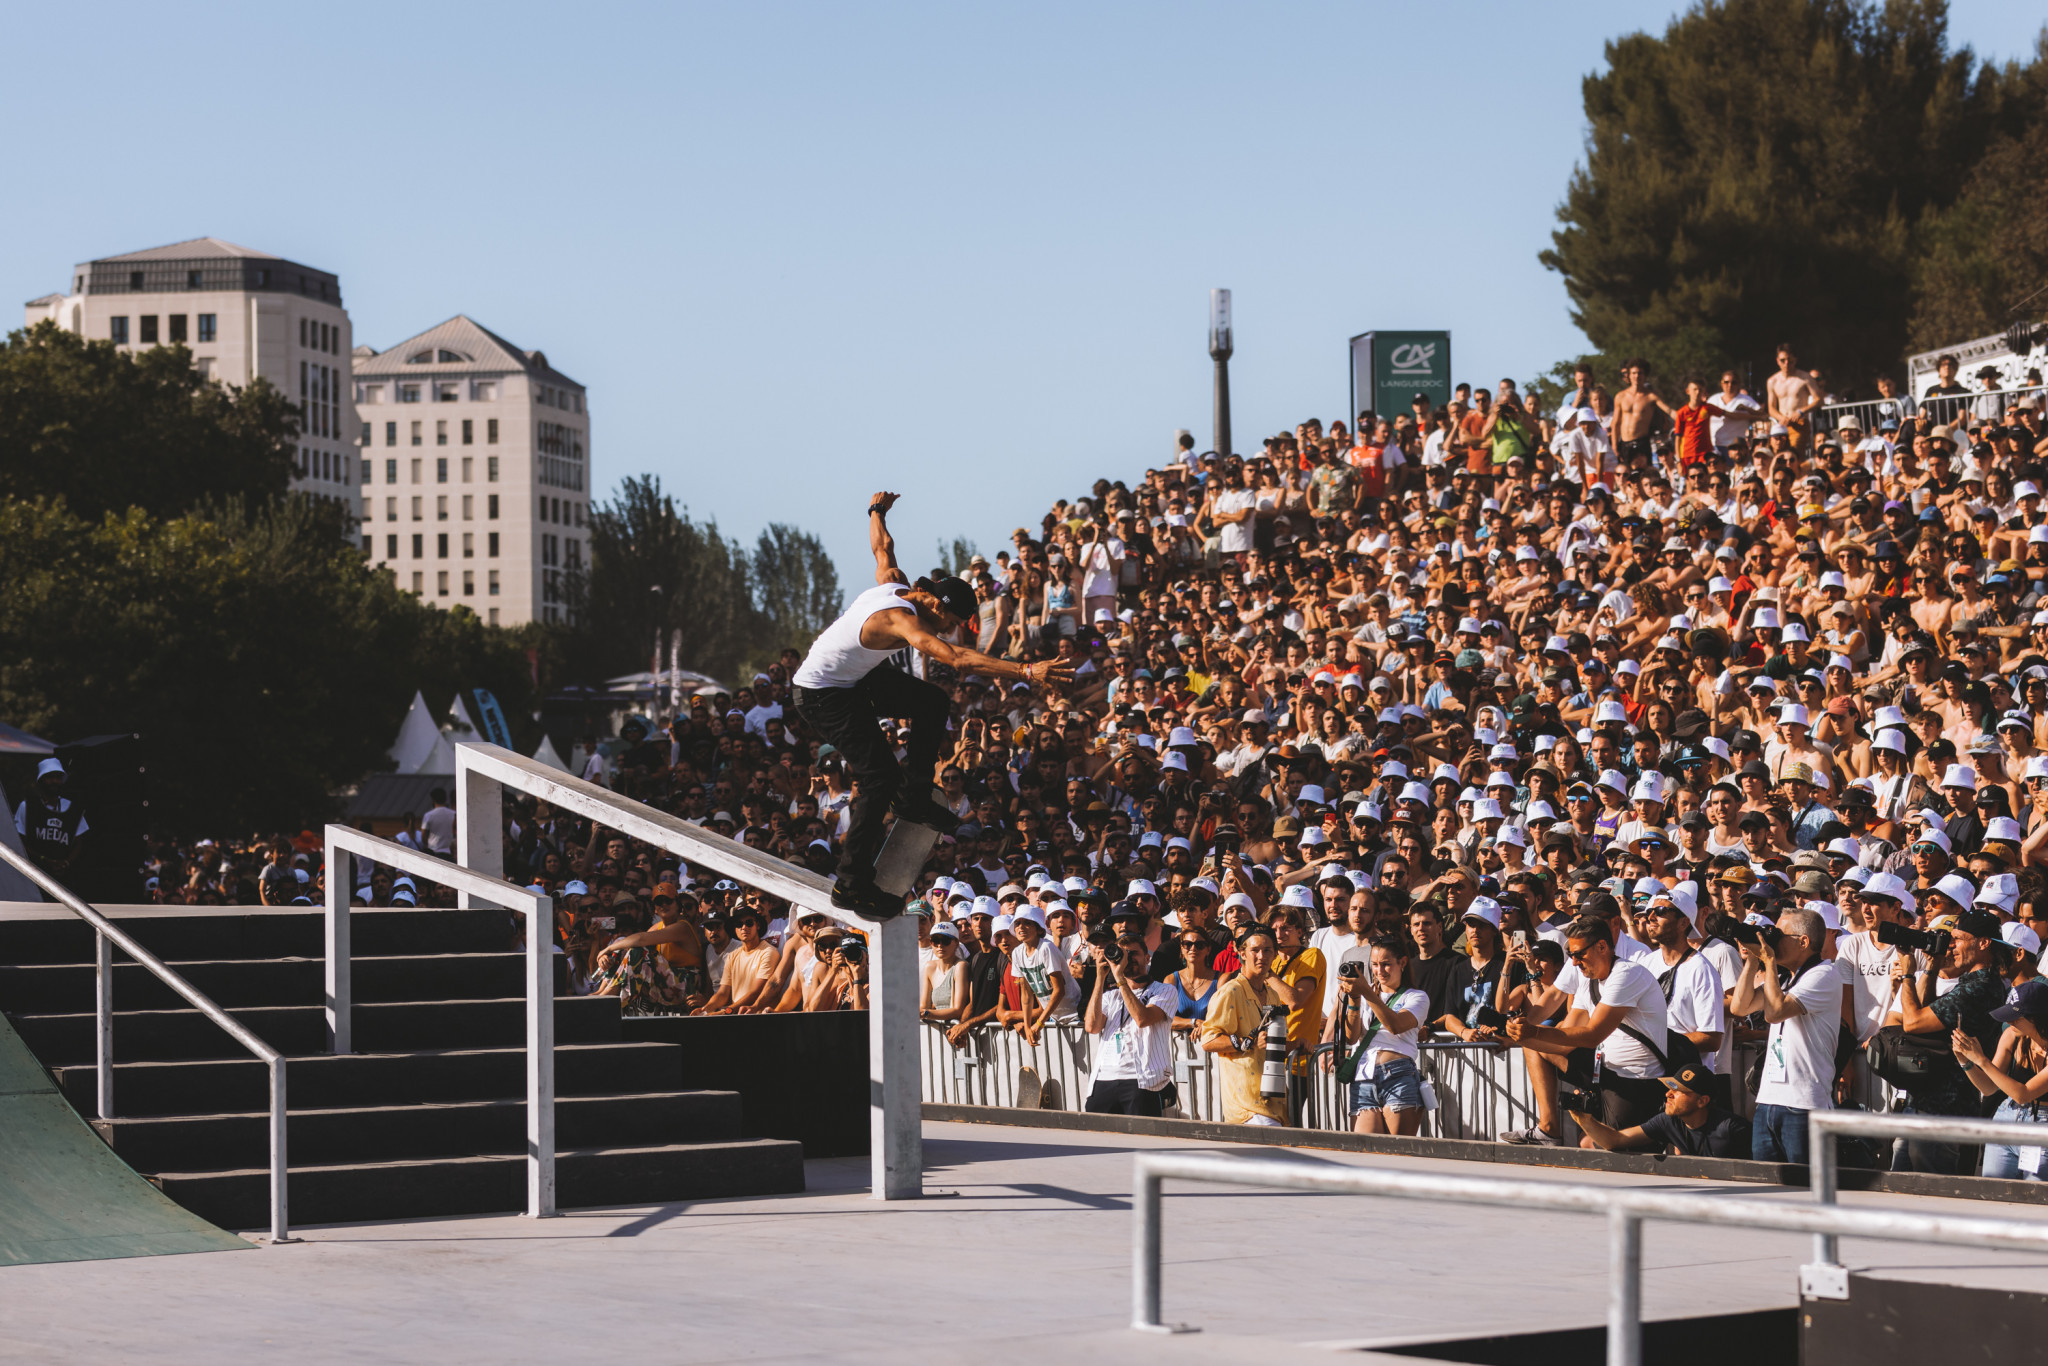 FISE organisers are set to increase the prize money for its skateboarding competitions to attract the sport's best athletes ©Hurricane - FISE